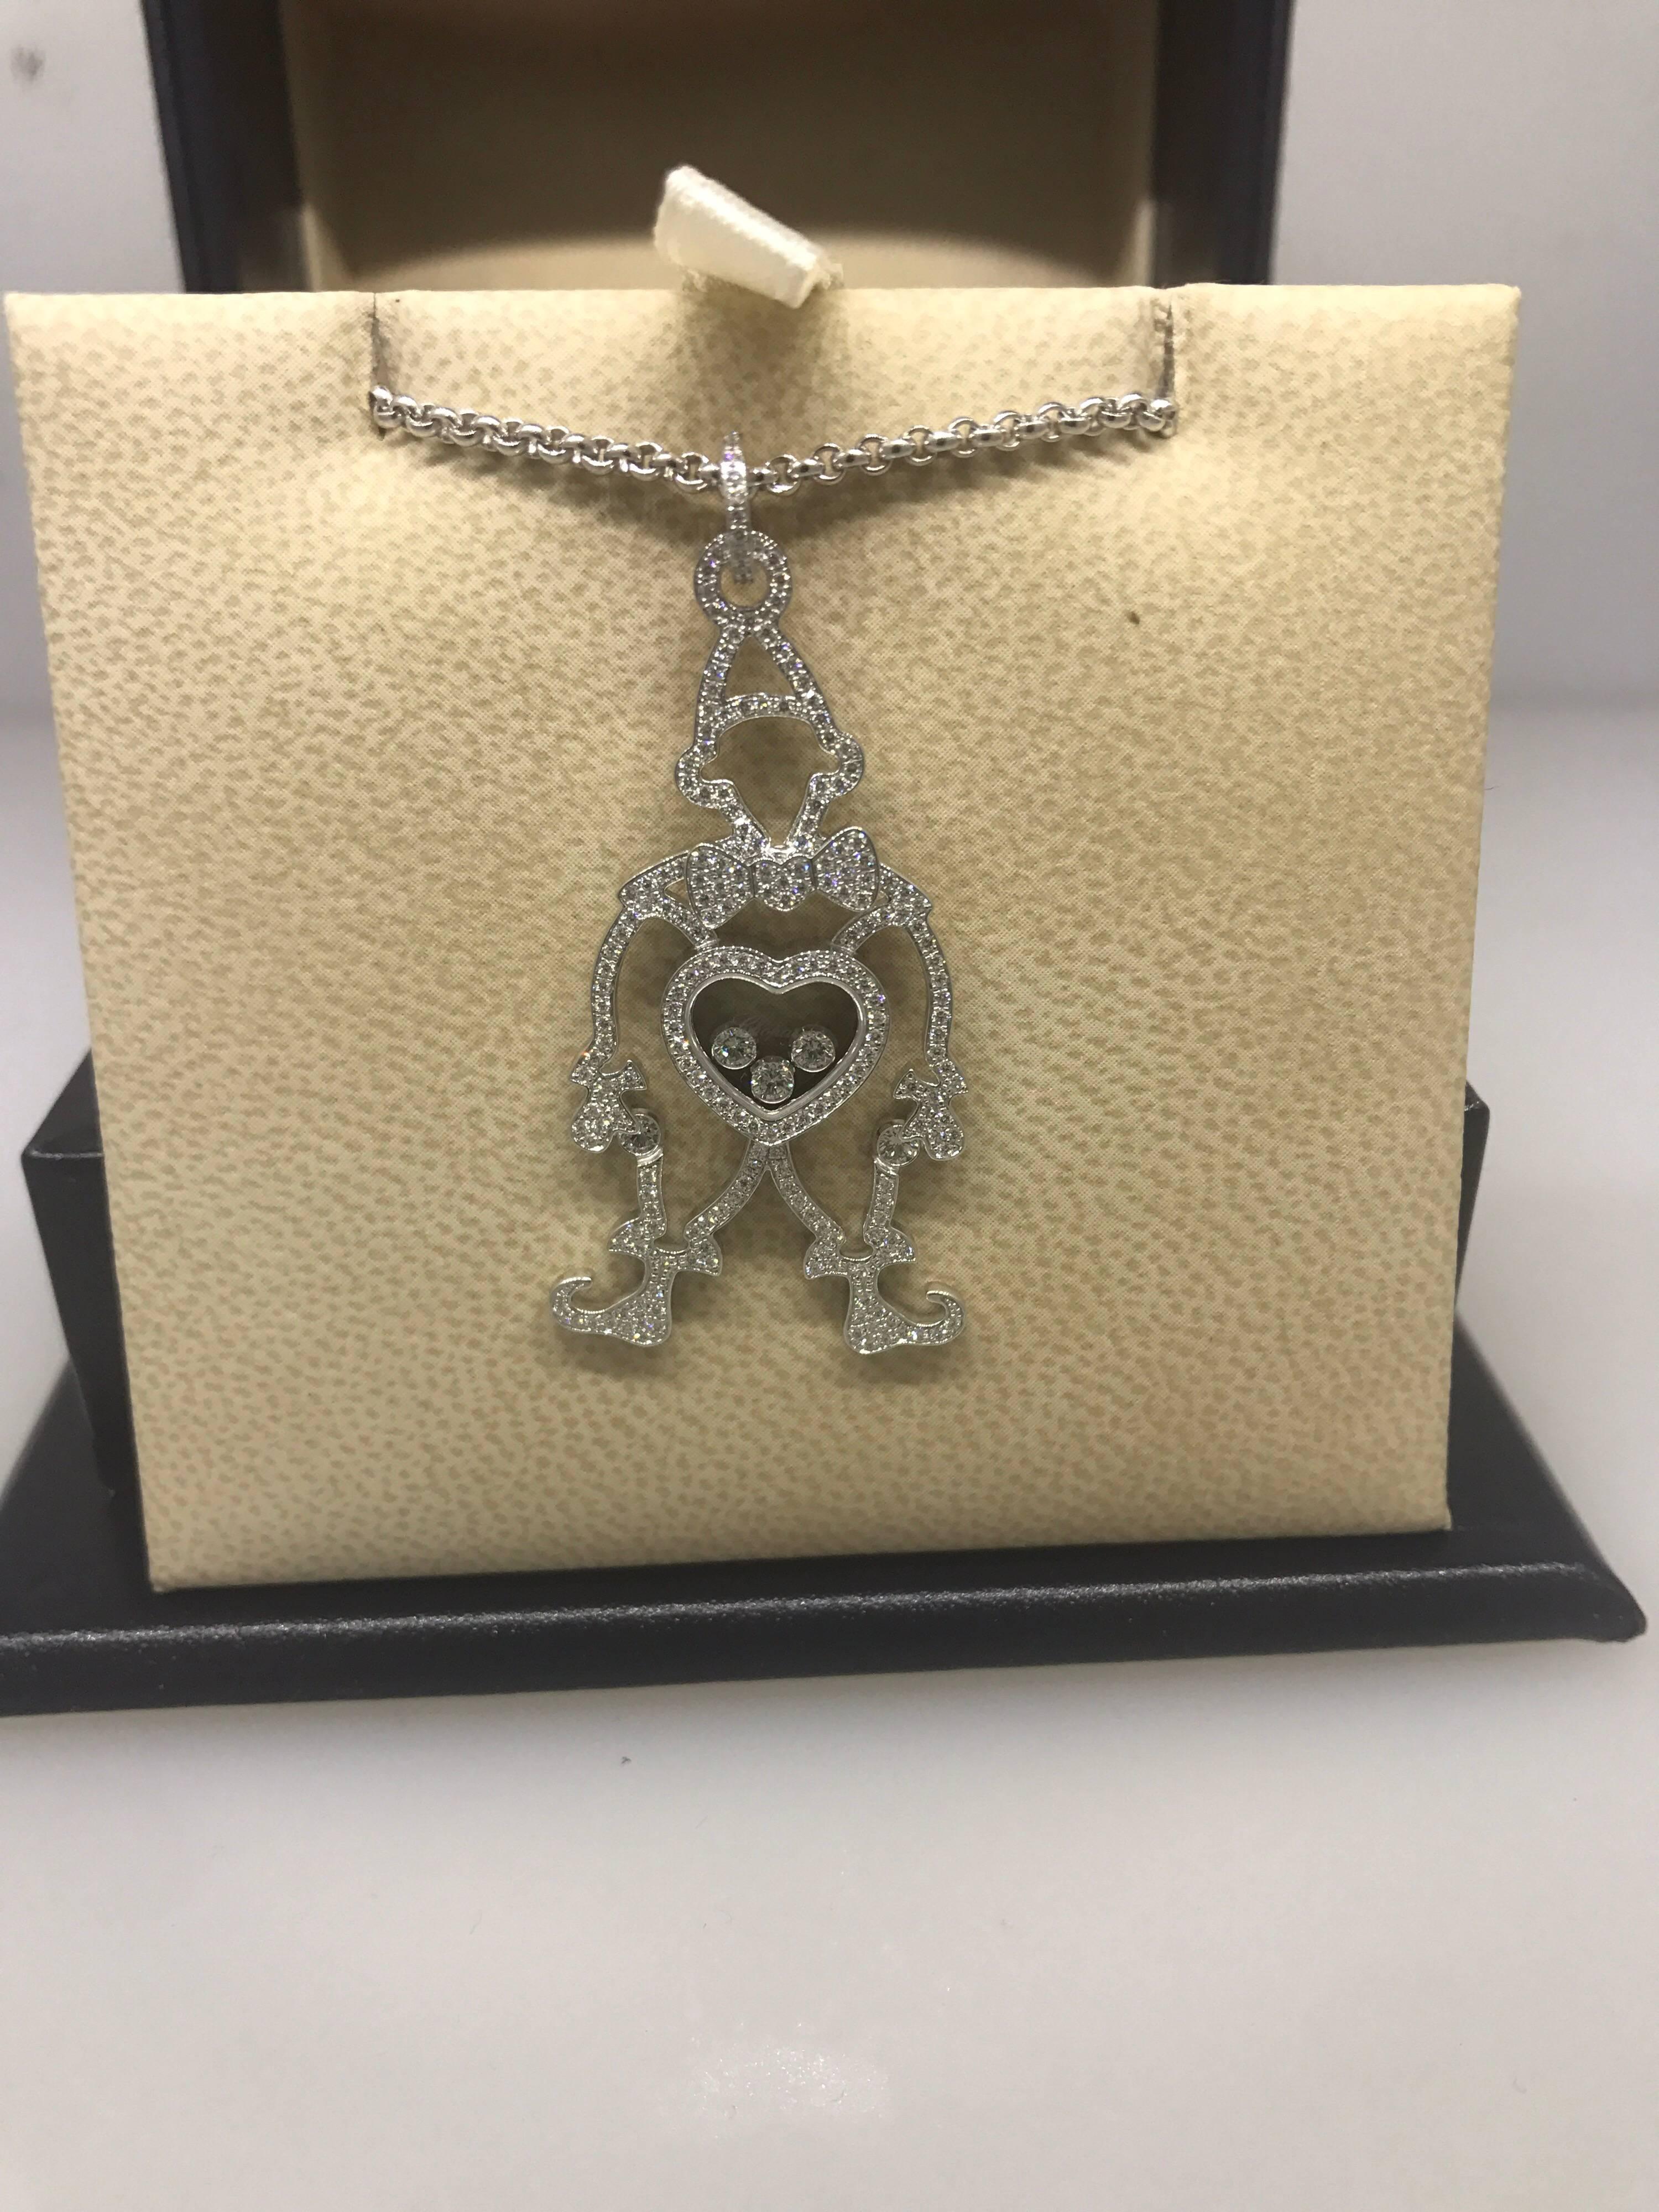 Chopard Happy Diamonds Clown Pendant / Necklace

Model Number: 79/7225-1003

100% Authentic

Brand New

Comes with original Chopard box, certificate of authenticity and warranty, and jewels manual

18 Karat White Gold (15.86gr)

231 Diamonds on the